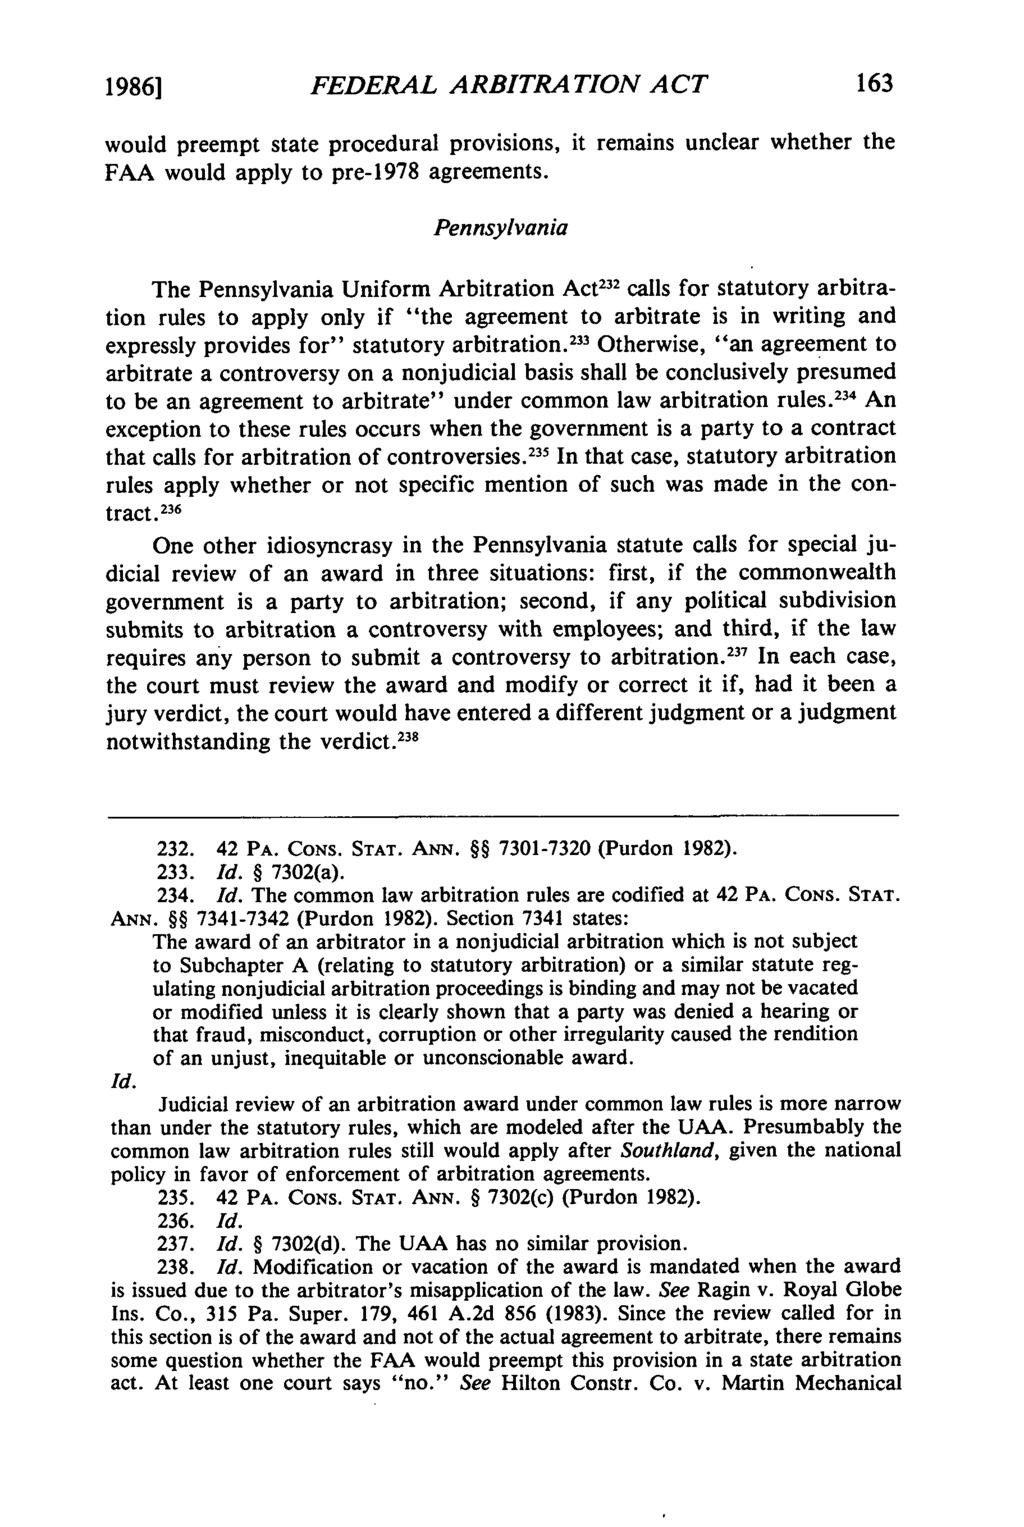 19861 et al.: Federal Arbitration Act Comparison FEDERAL ARBITRATION ACT would preempt state procedural provisions, it remains unclear whether the FAA would apply to pre-1978 agreements.